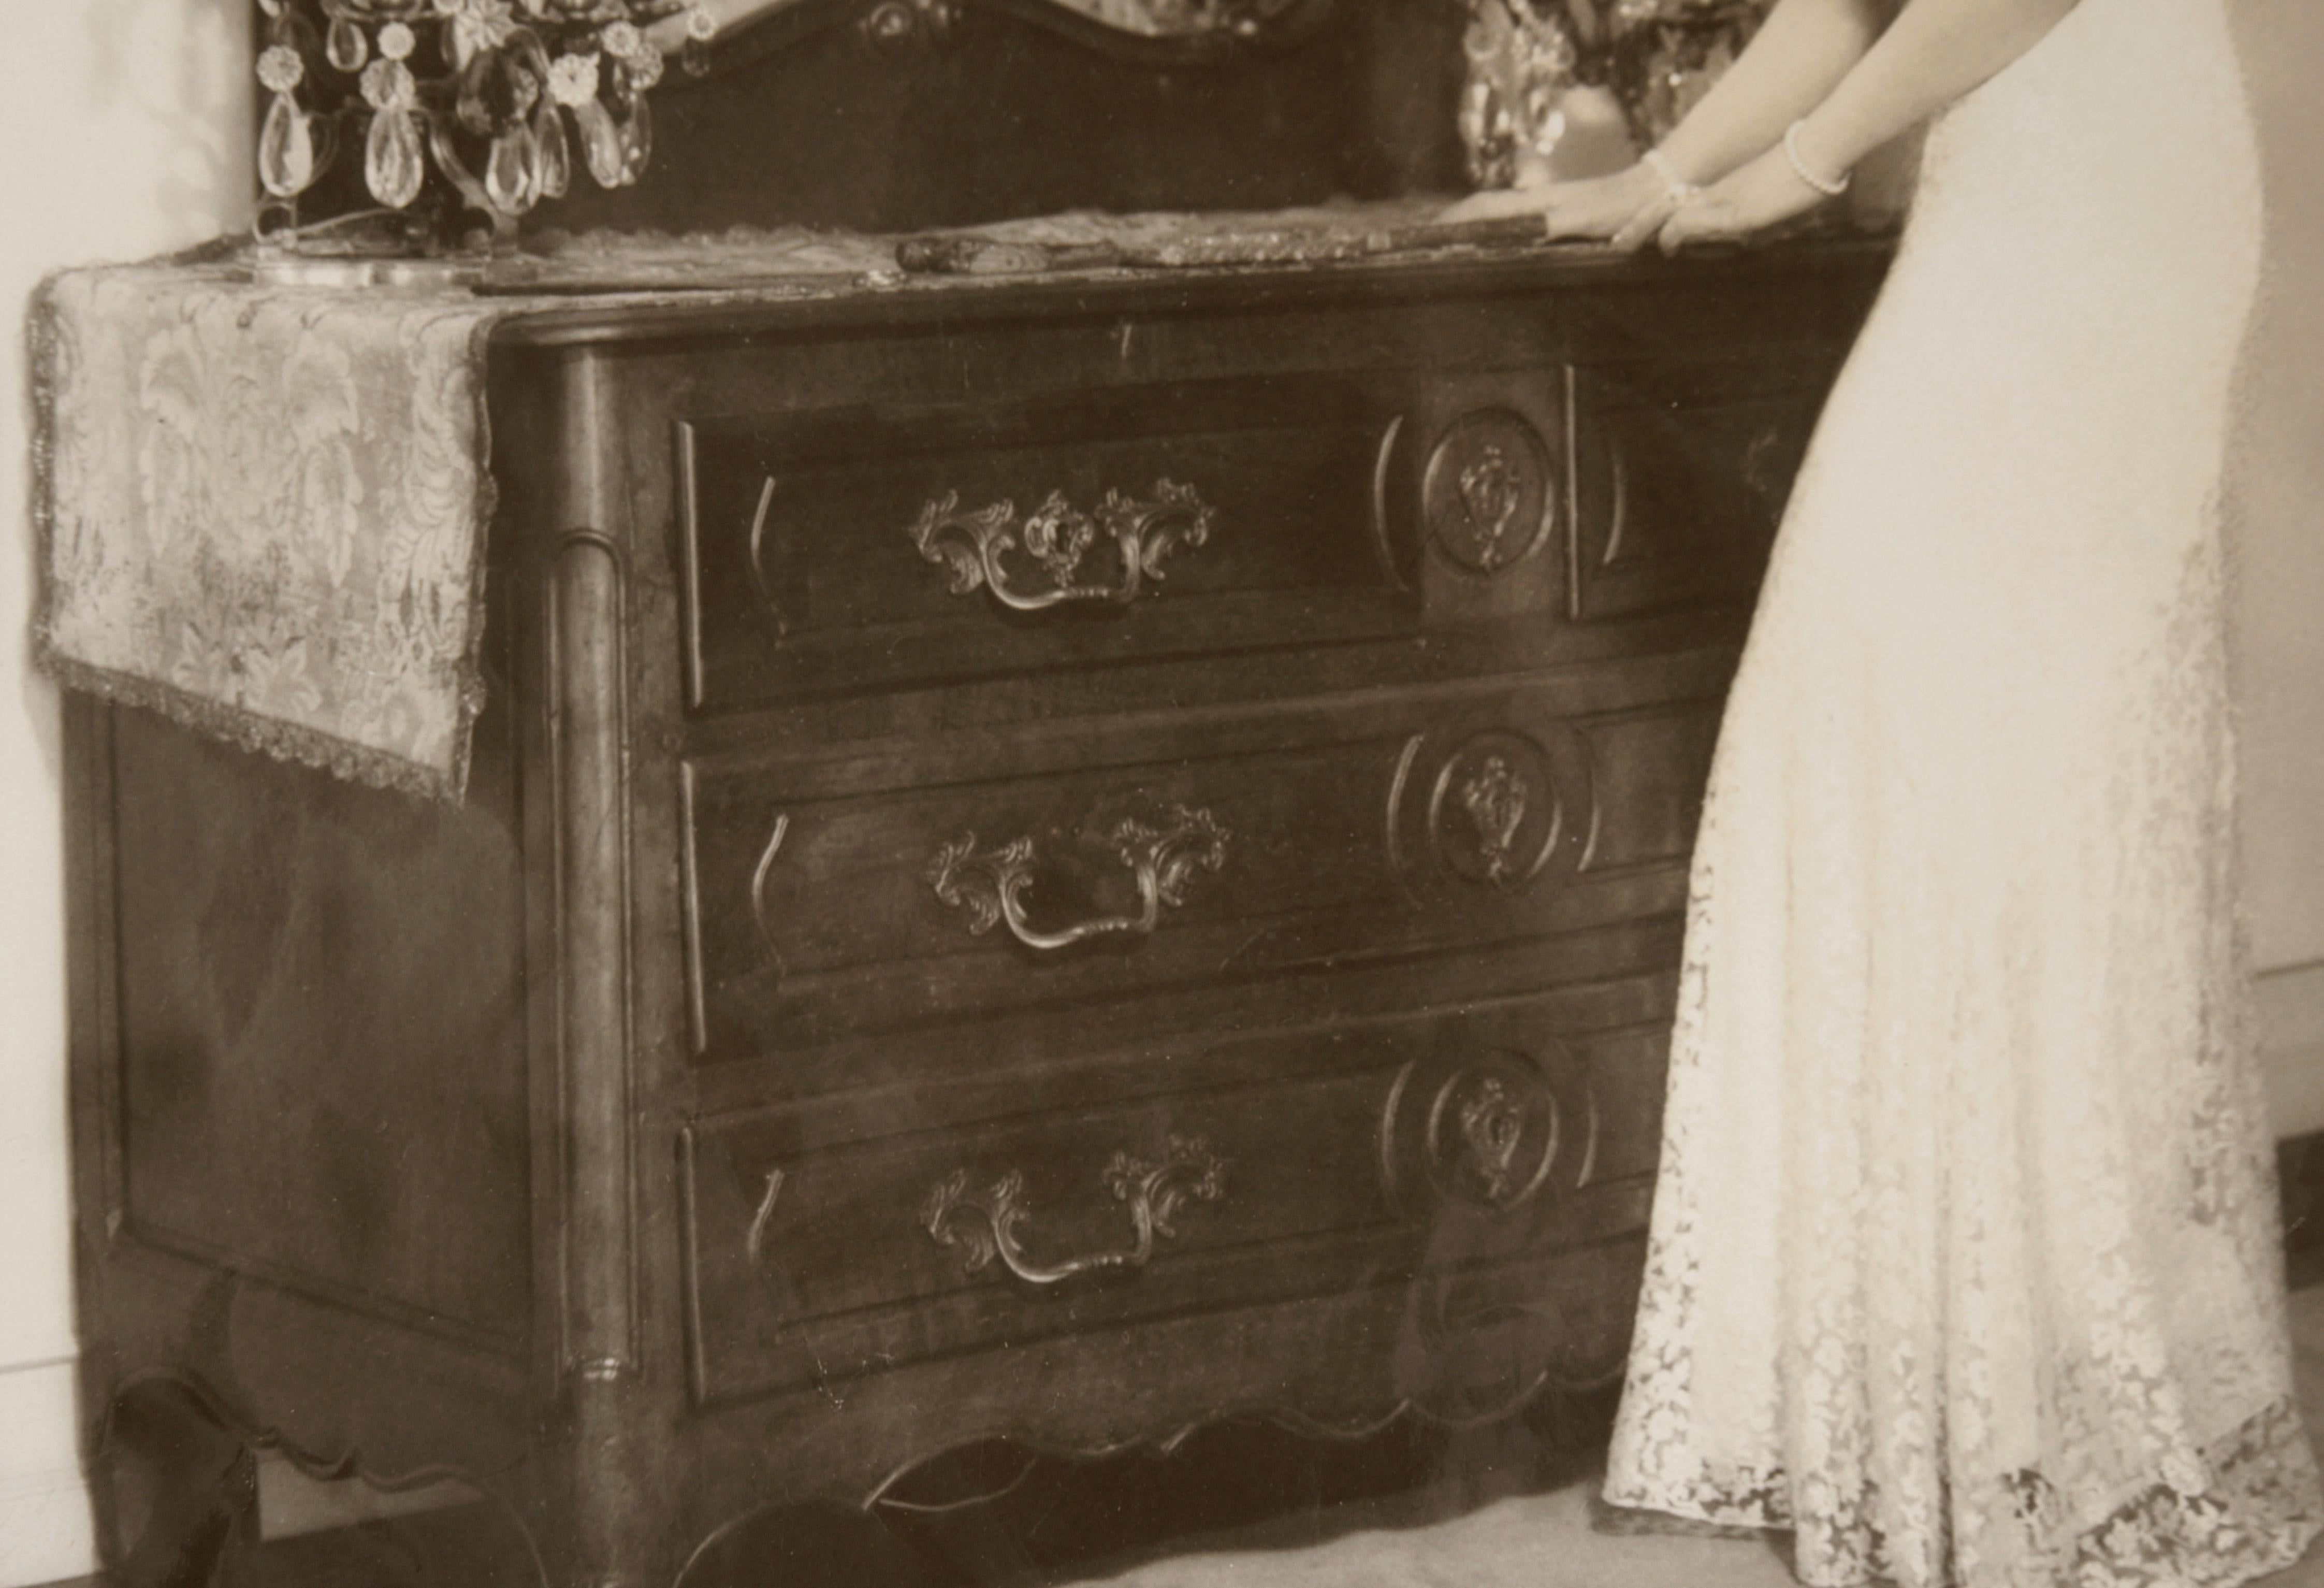 Mary Pickford Standing by a Mirrored Dresser - B&W Photo - Photorealist Photograph by Unknown